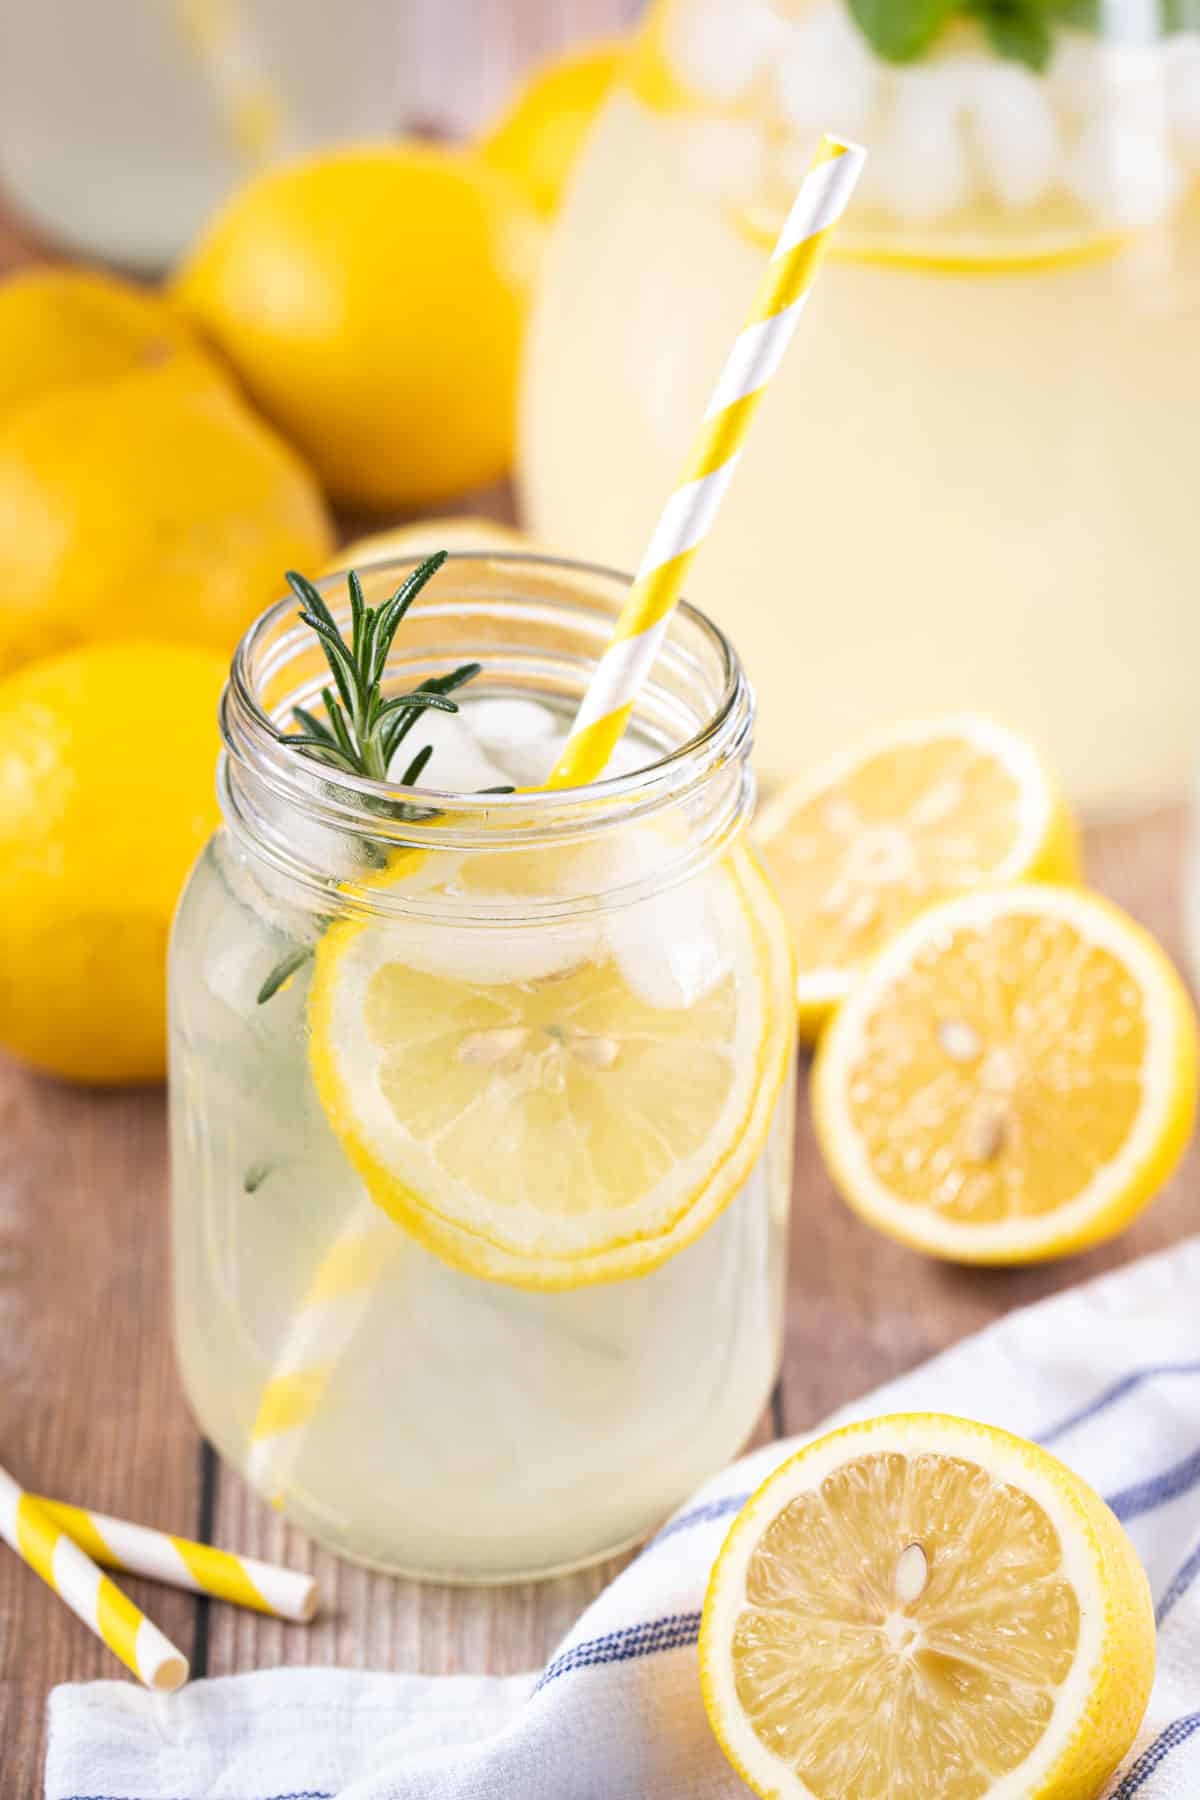 a glass containing lemon cordial with a yellow straw.